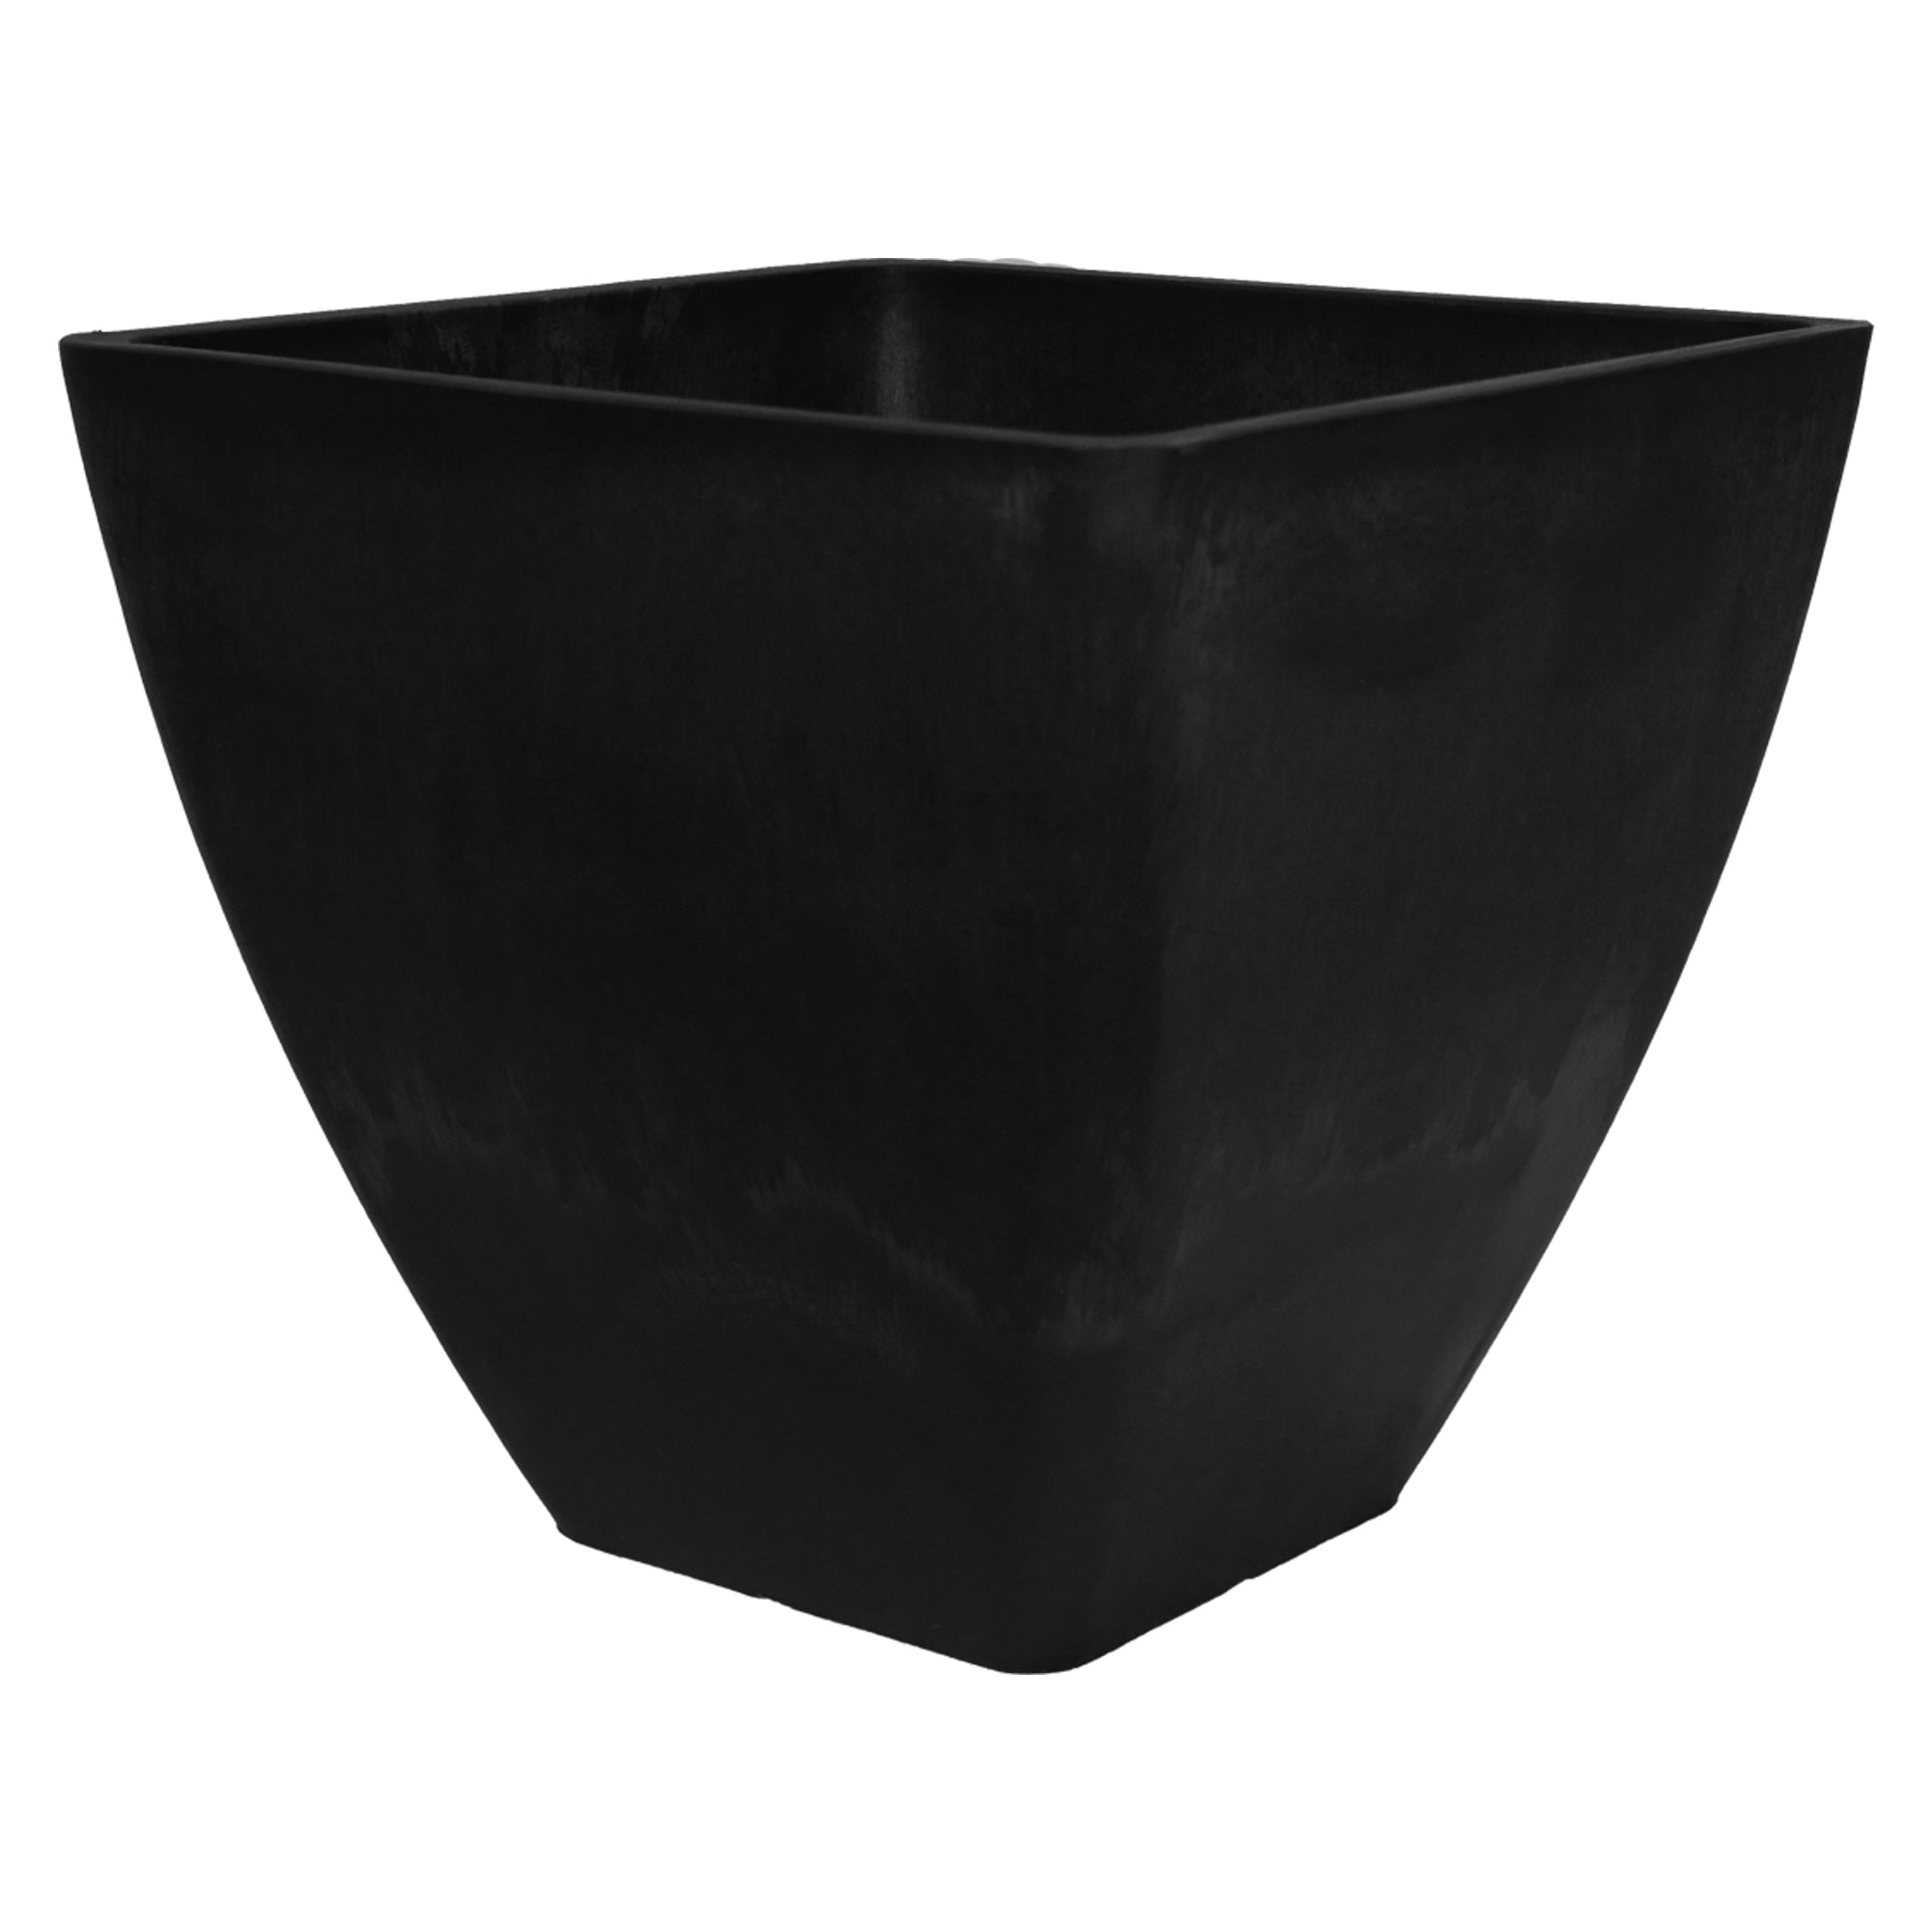 12 inch planter in graphite on a white background